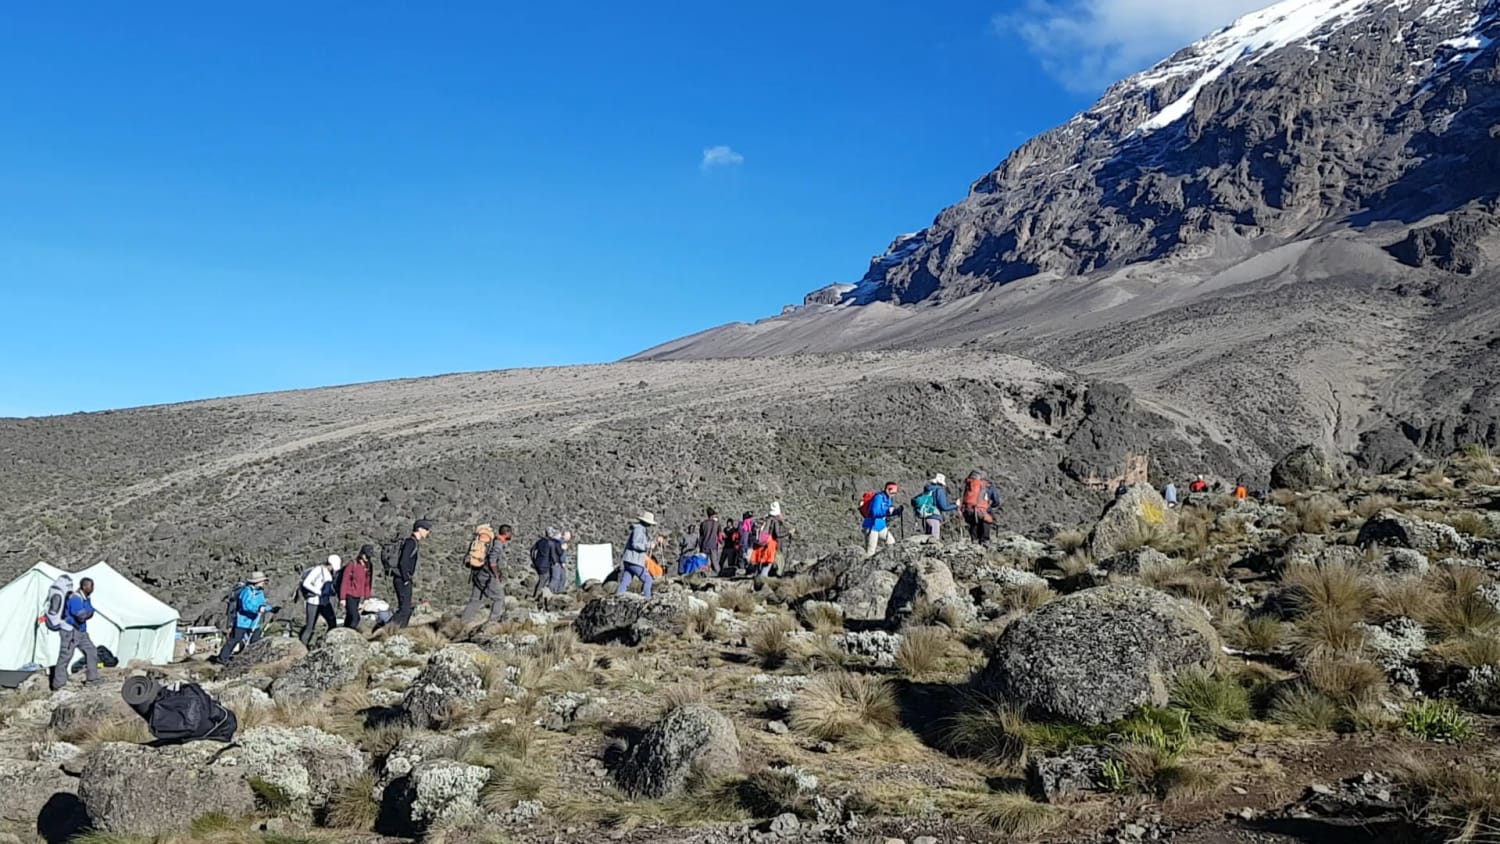 In January, just before the pandemic, we hiked up Mount Kilimanjaro. This video was taken the morning of day 5, just before leaving the last camp befor basecamp. This was probably one of the most inspiring and rewarding hikes we've ever done! Watch the video with sound on if you can!